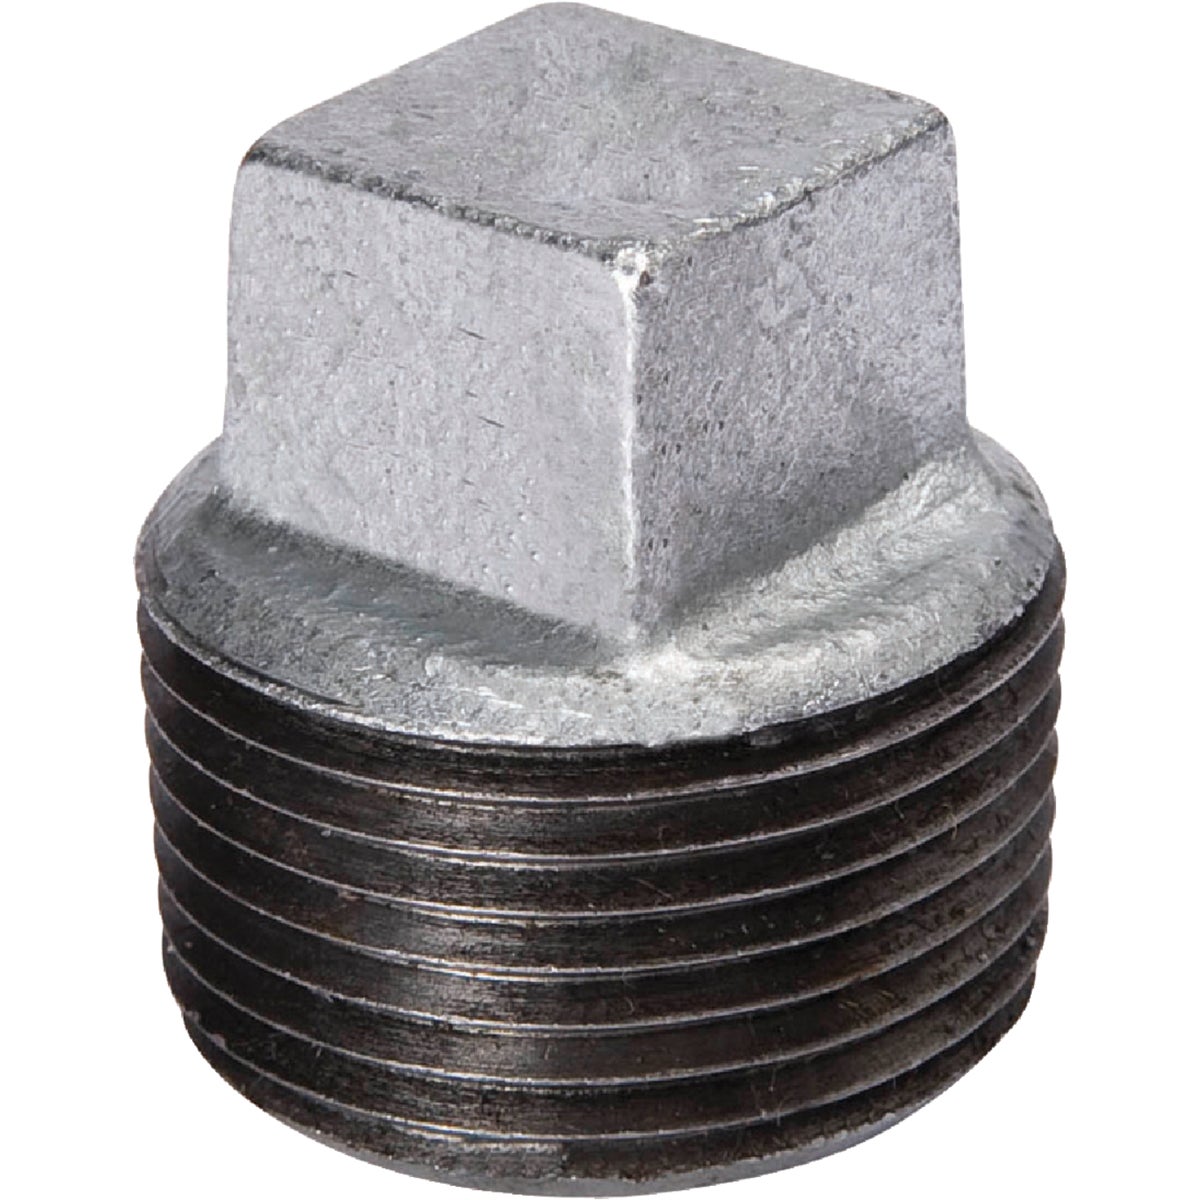 Southland 1-1/4 In. Malleable Iron Galvanized Plug